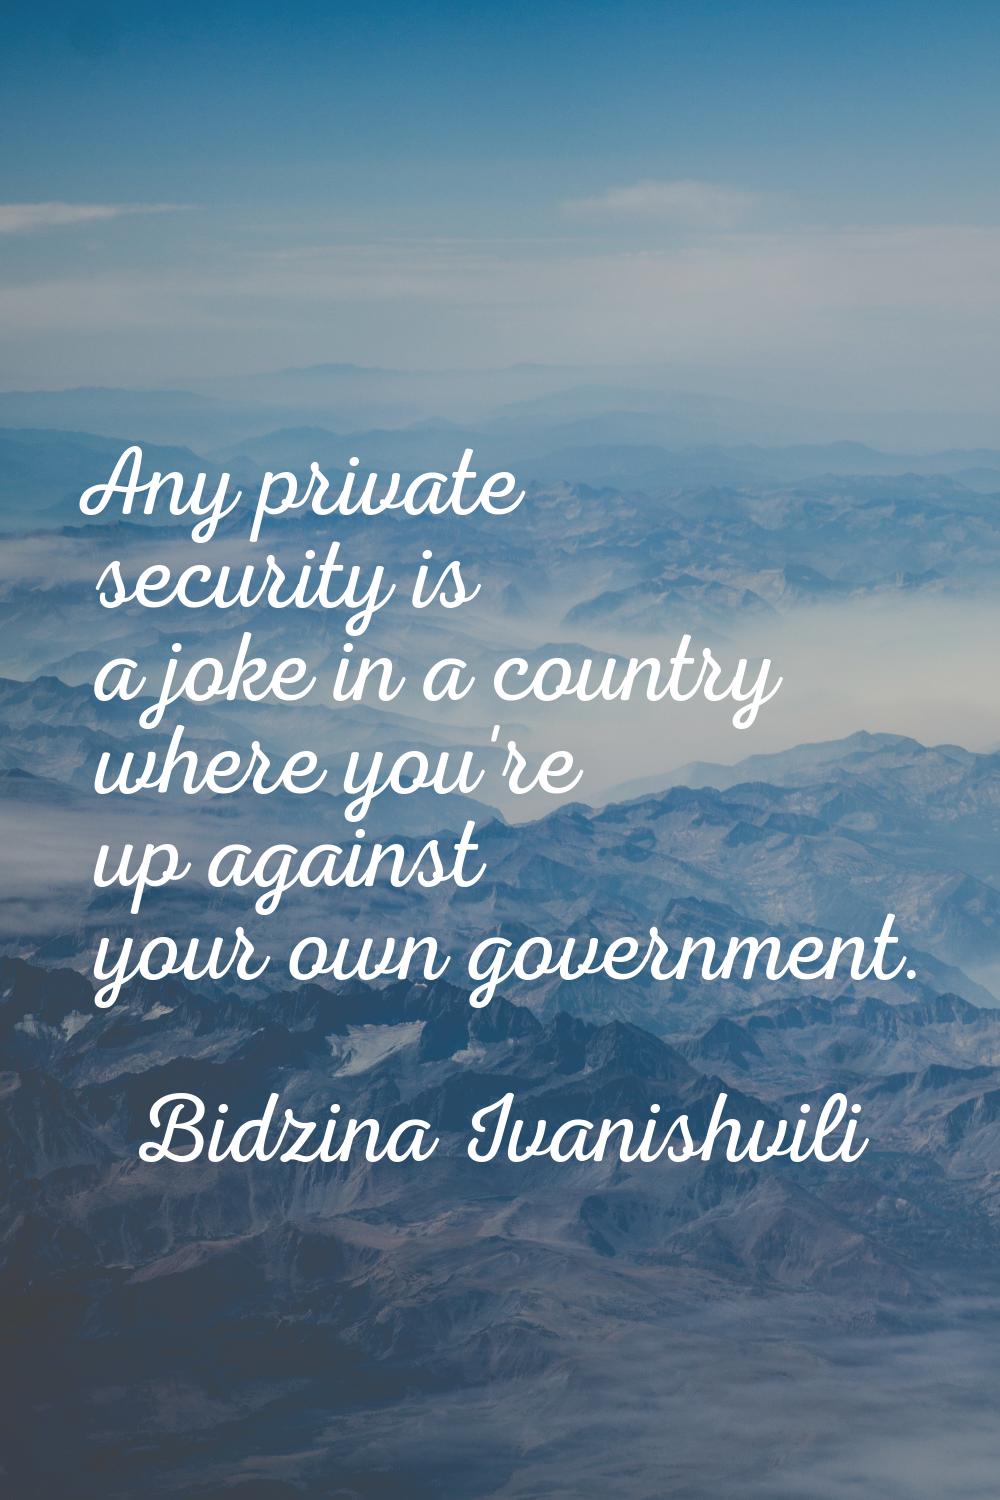 Any private security is a joke in a country where you're up against your own government.